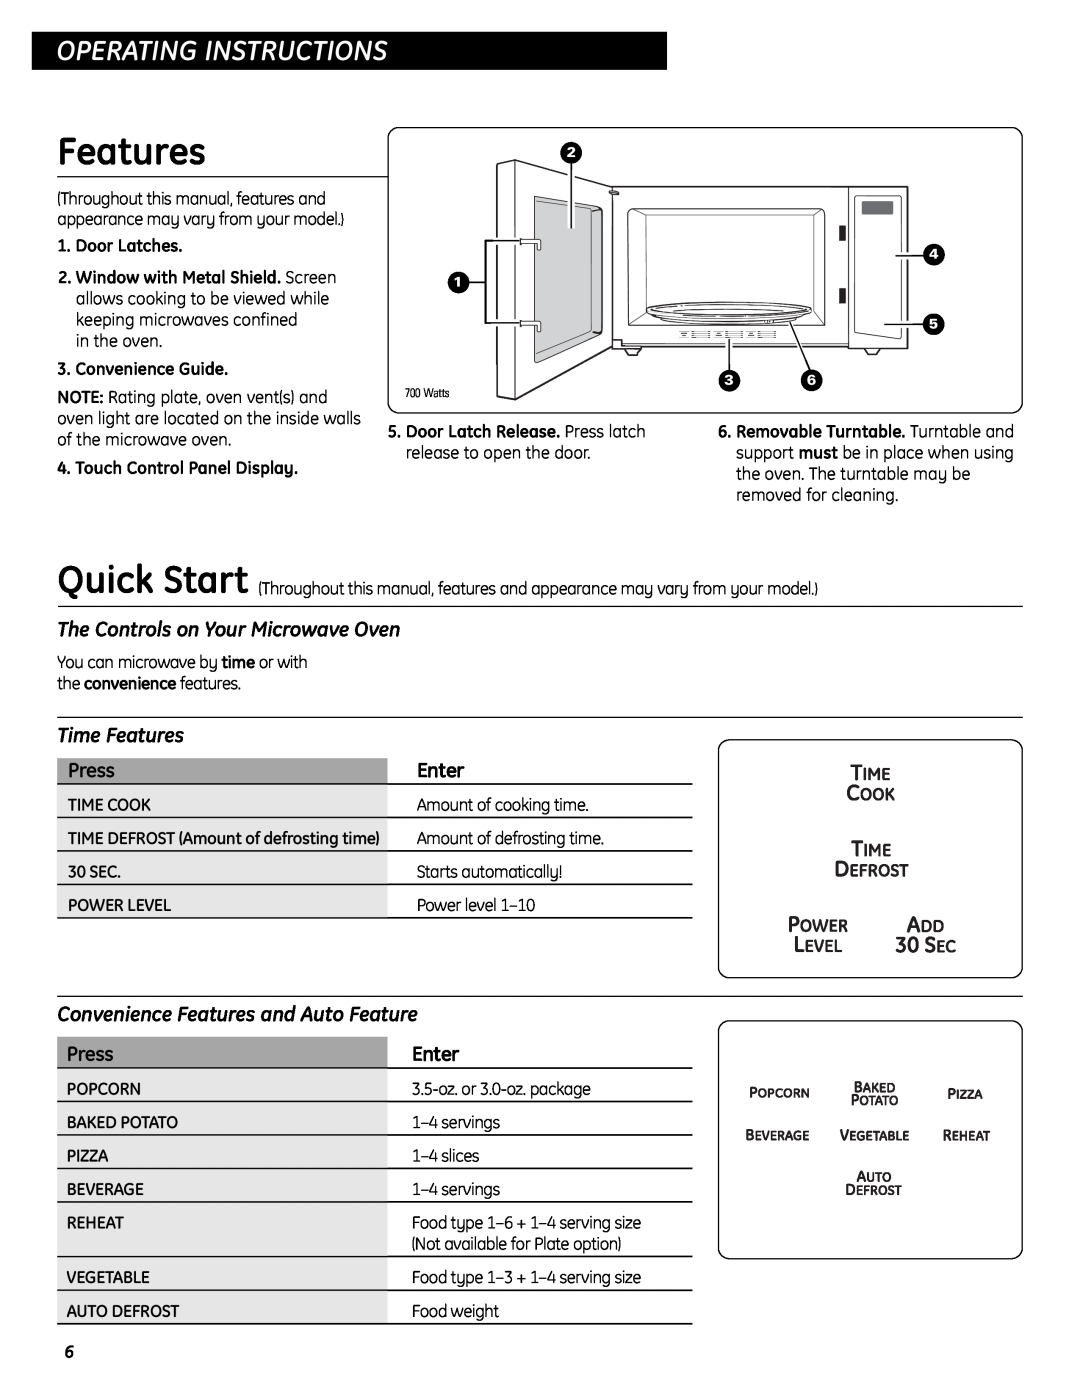 GE SES0732 Operating Instructions, The Controls on Your Microwave Oven, Time Features, Enter, Press, Door Latches 